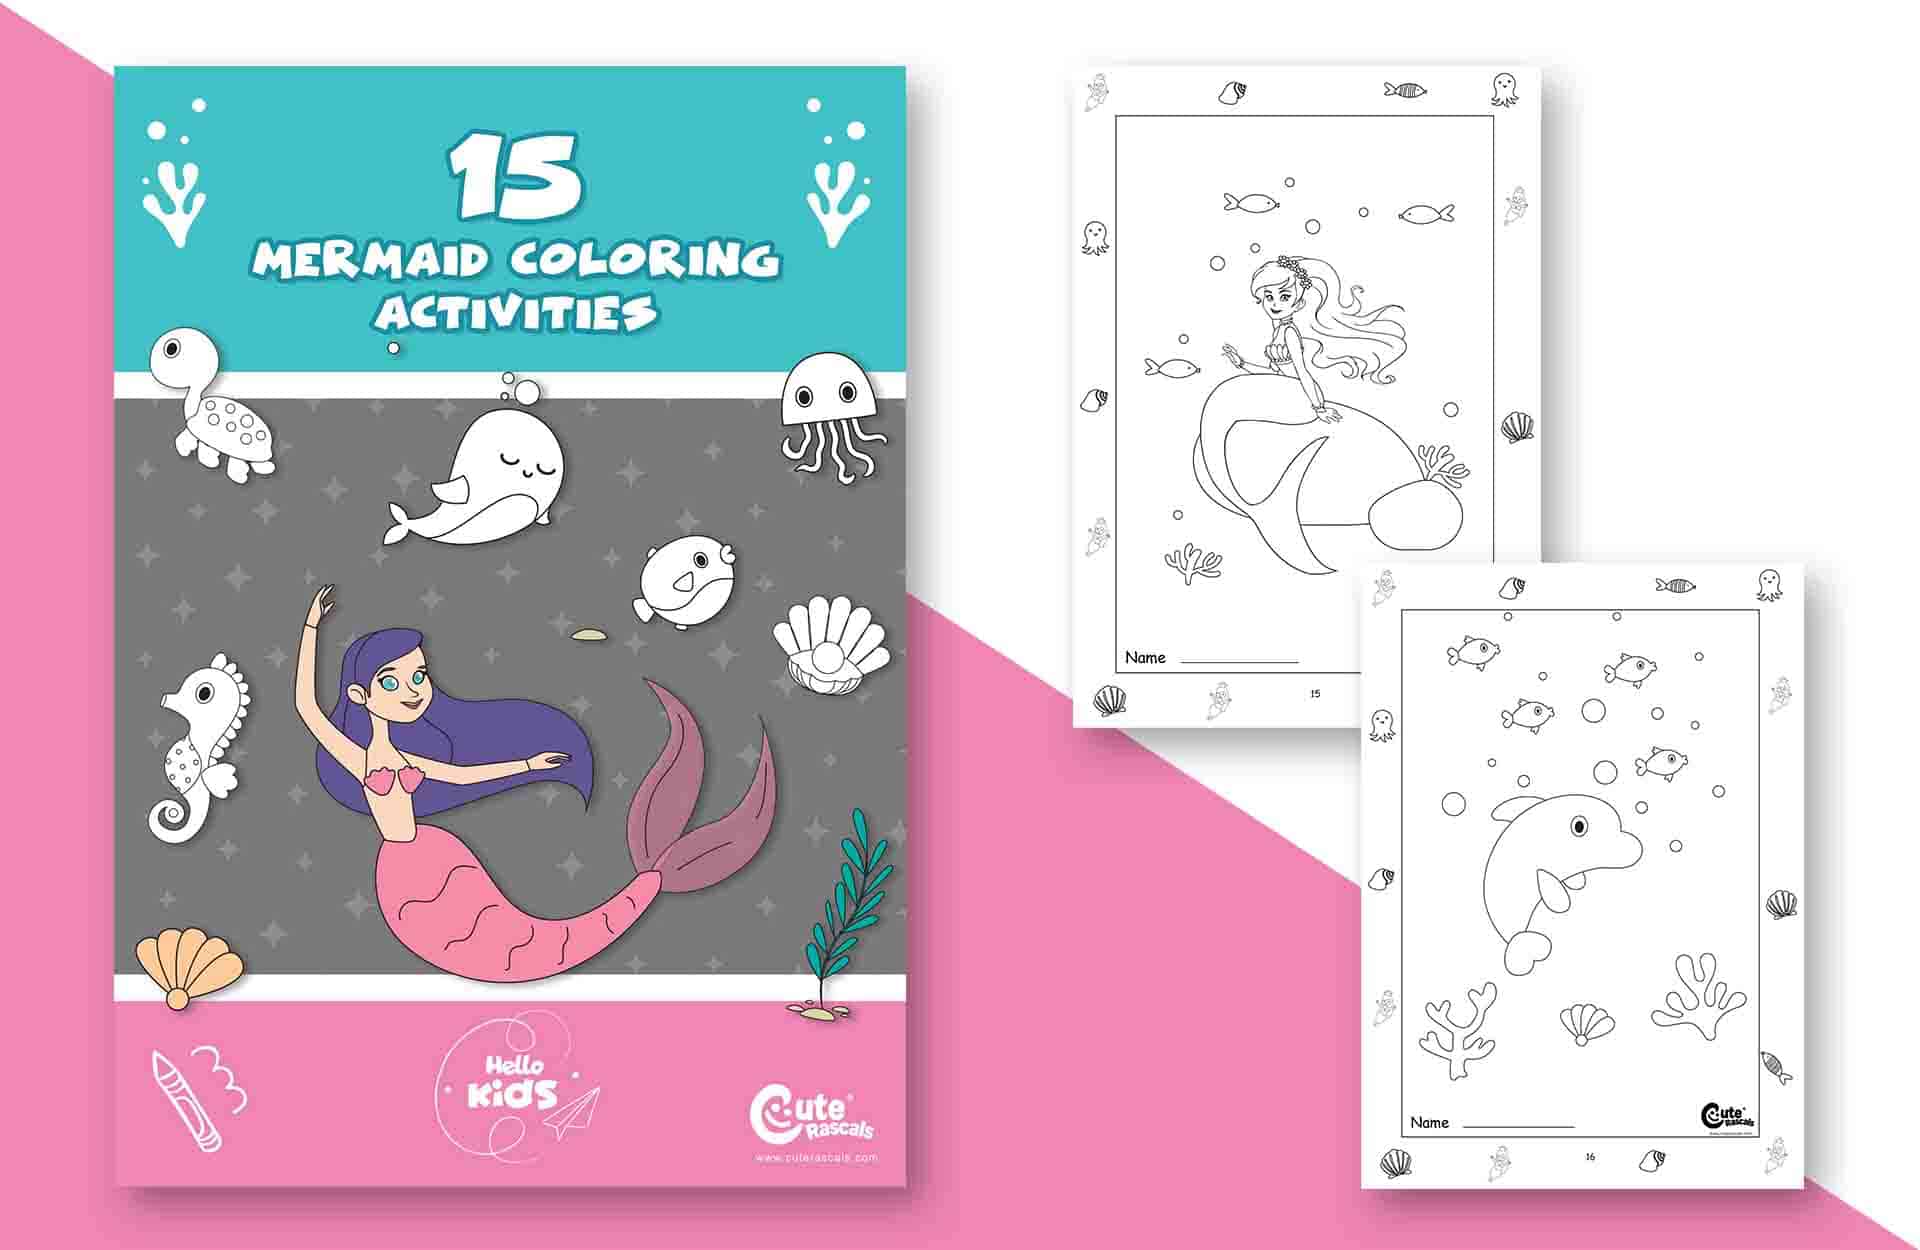 15 Fun Mermaid Coloring Pages for Kids and More!